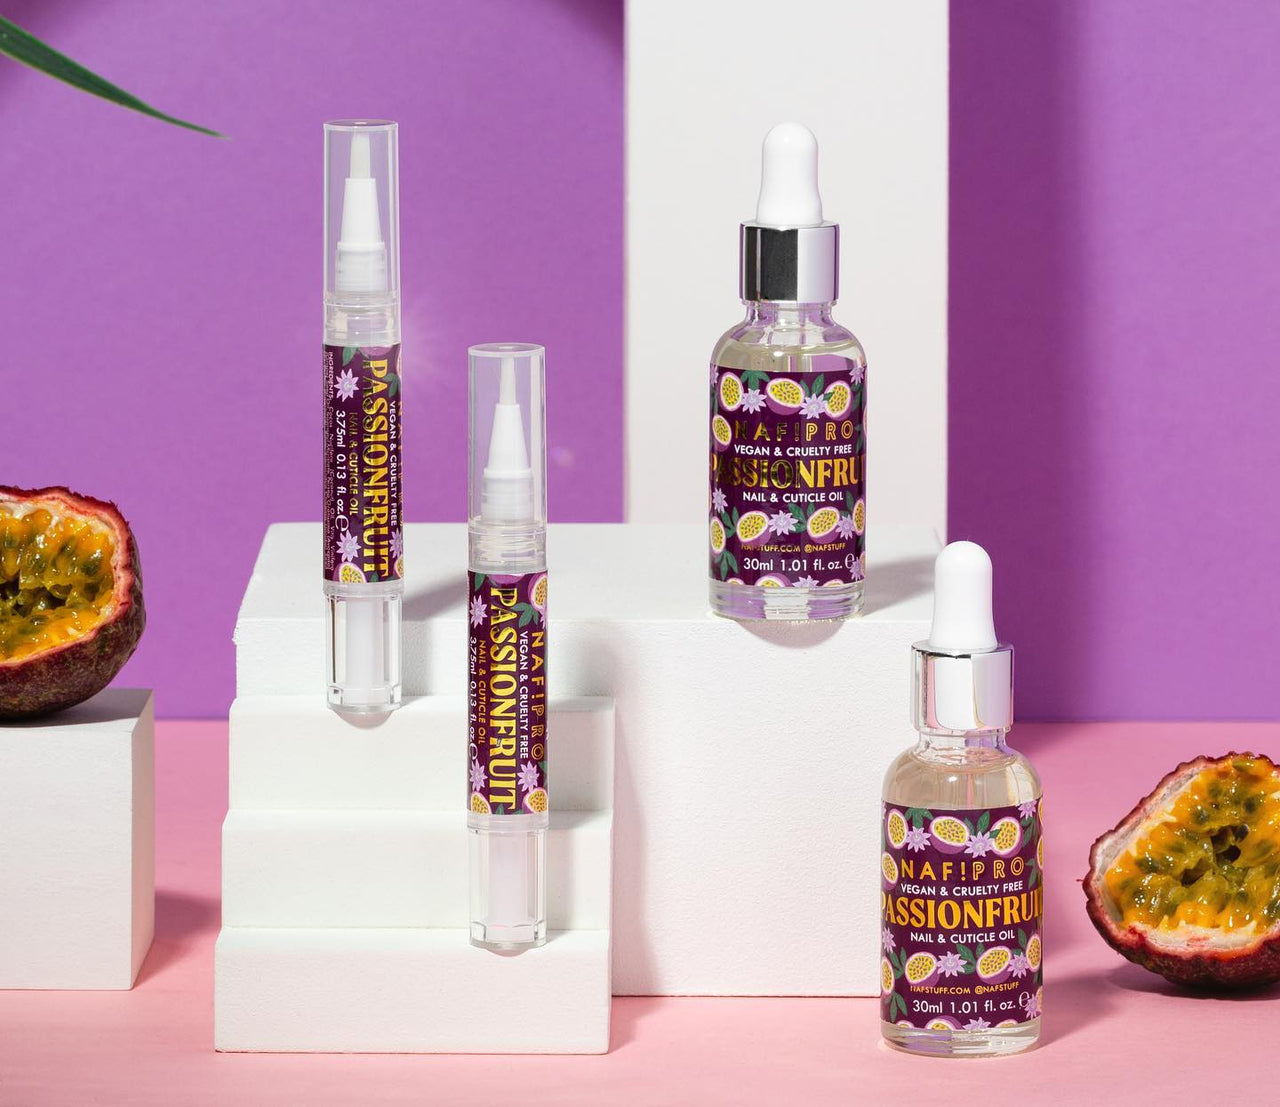 NAF! Pro Passionfruit Nail & Cuticle Oil